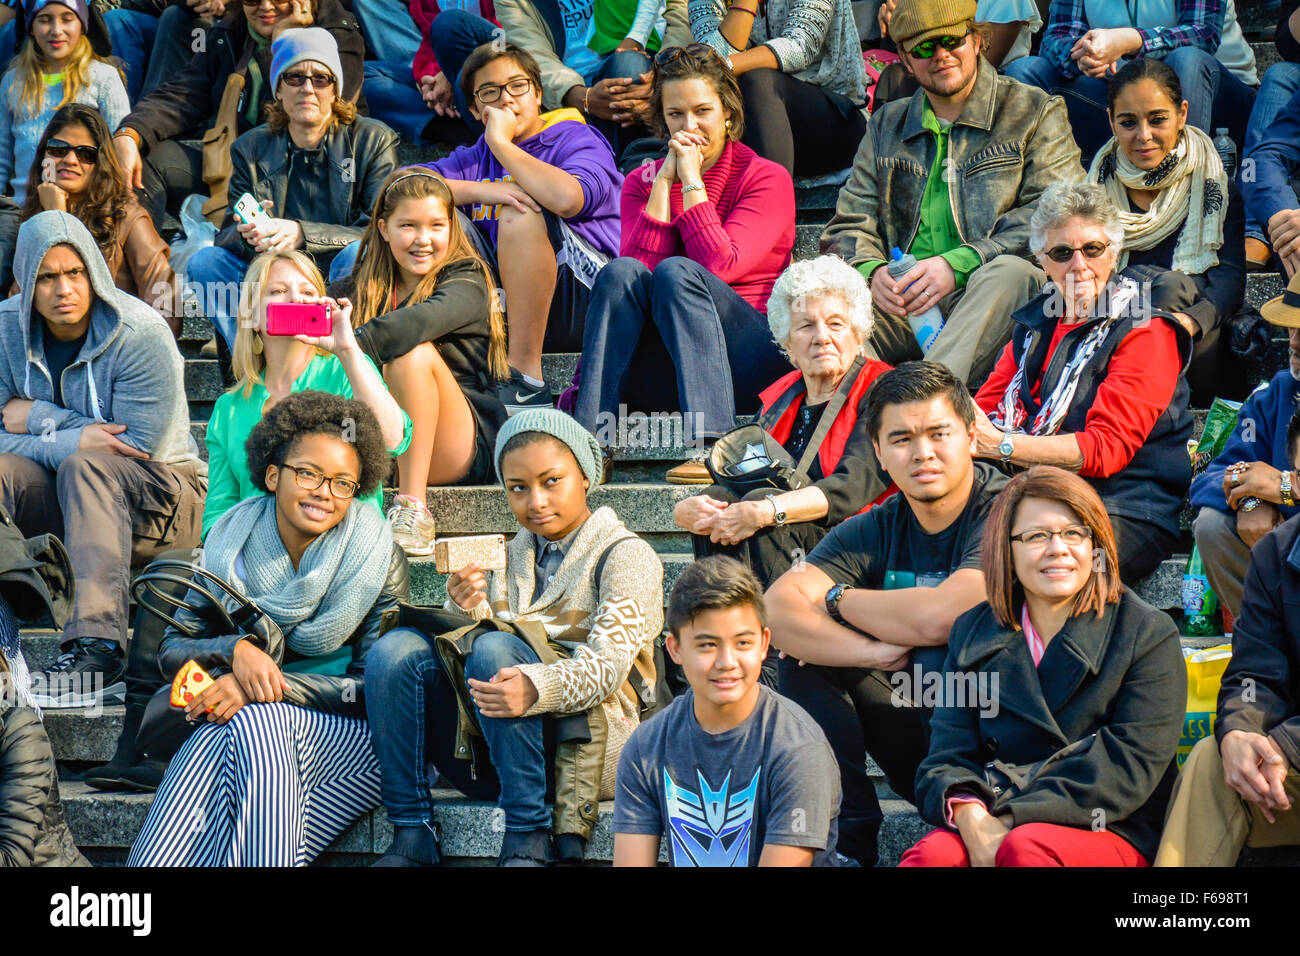 A large, diverse group of people of all ages & ethnicities sit outside in rows as an audience watching a live performance in USA melting pot city Stock Photo